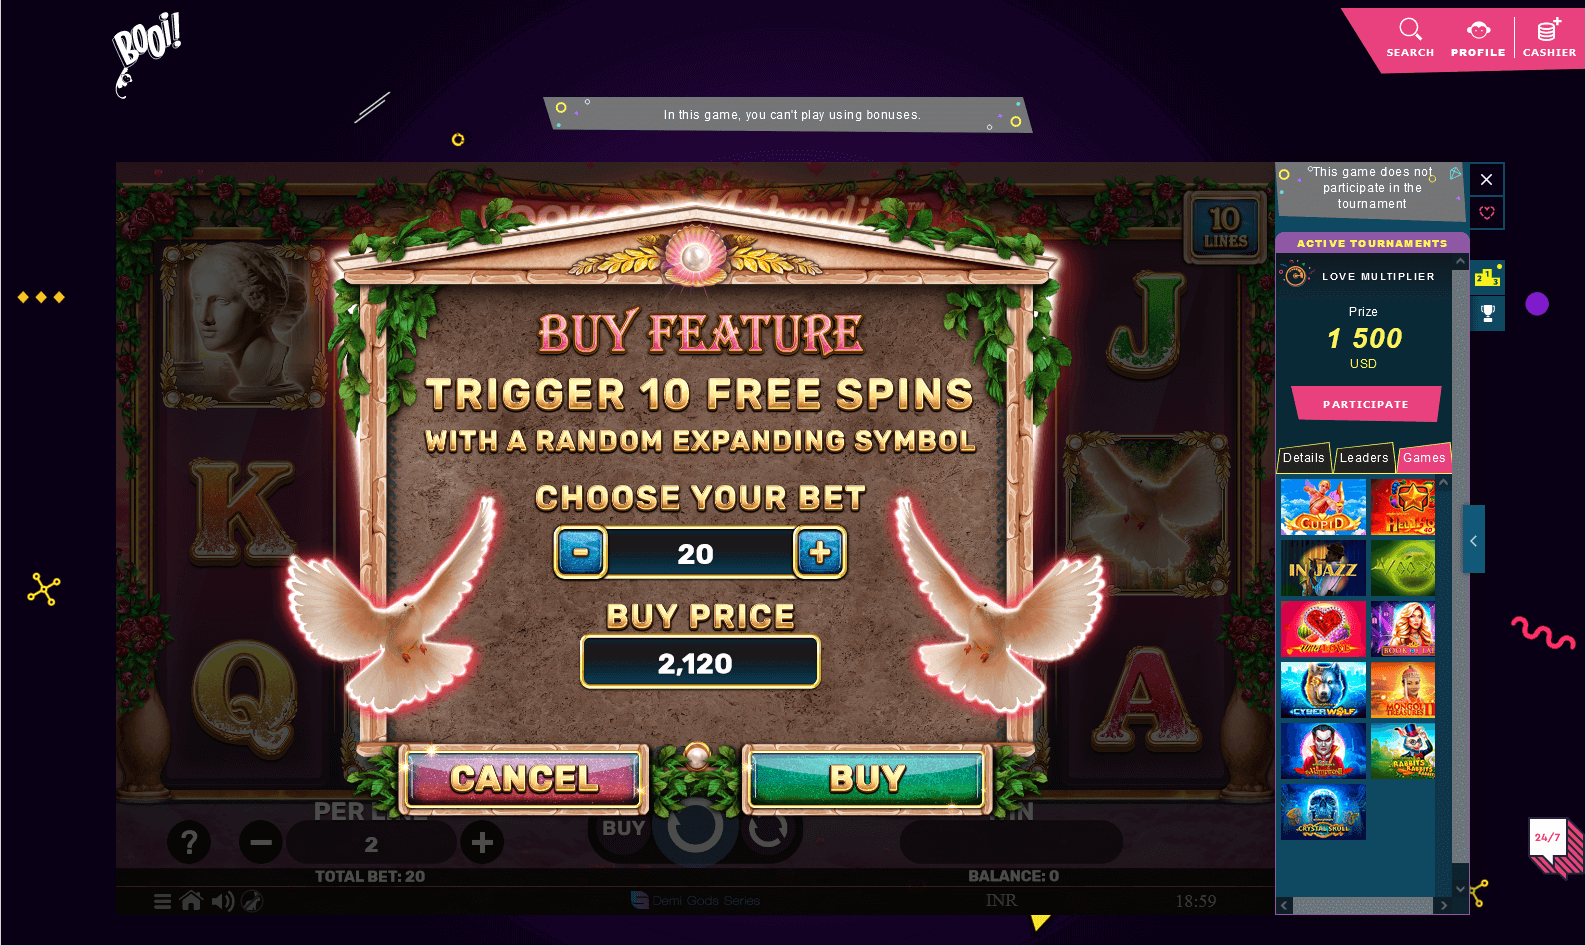 Select the size of the bet to play in the casino and confirm your choice